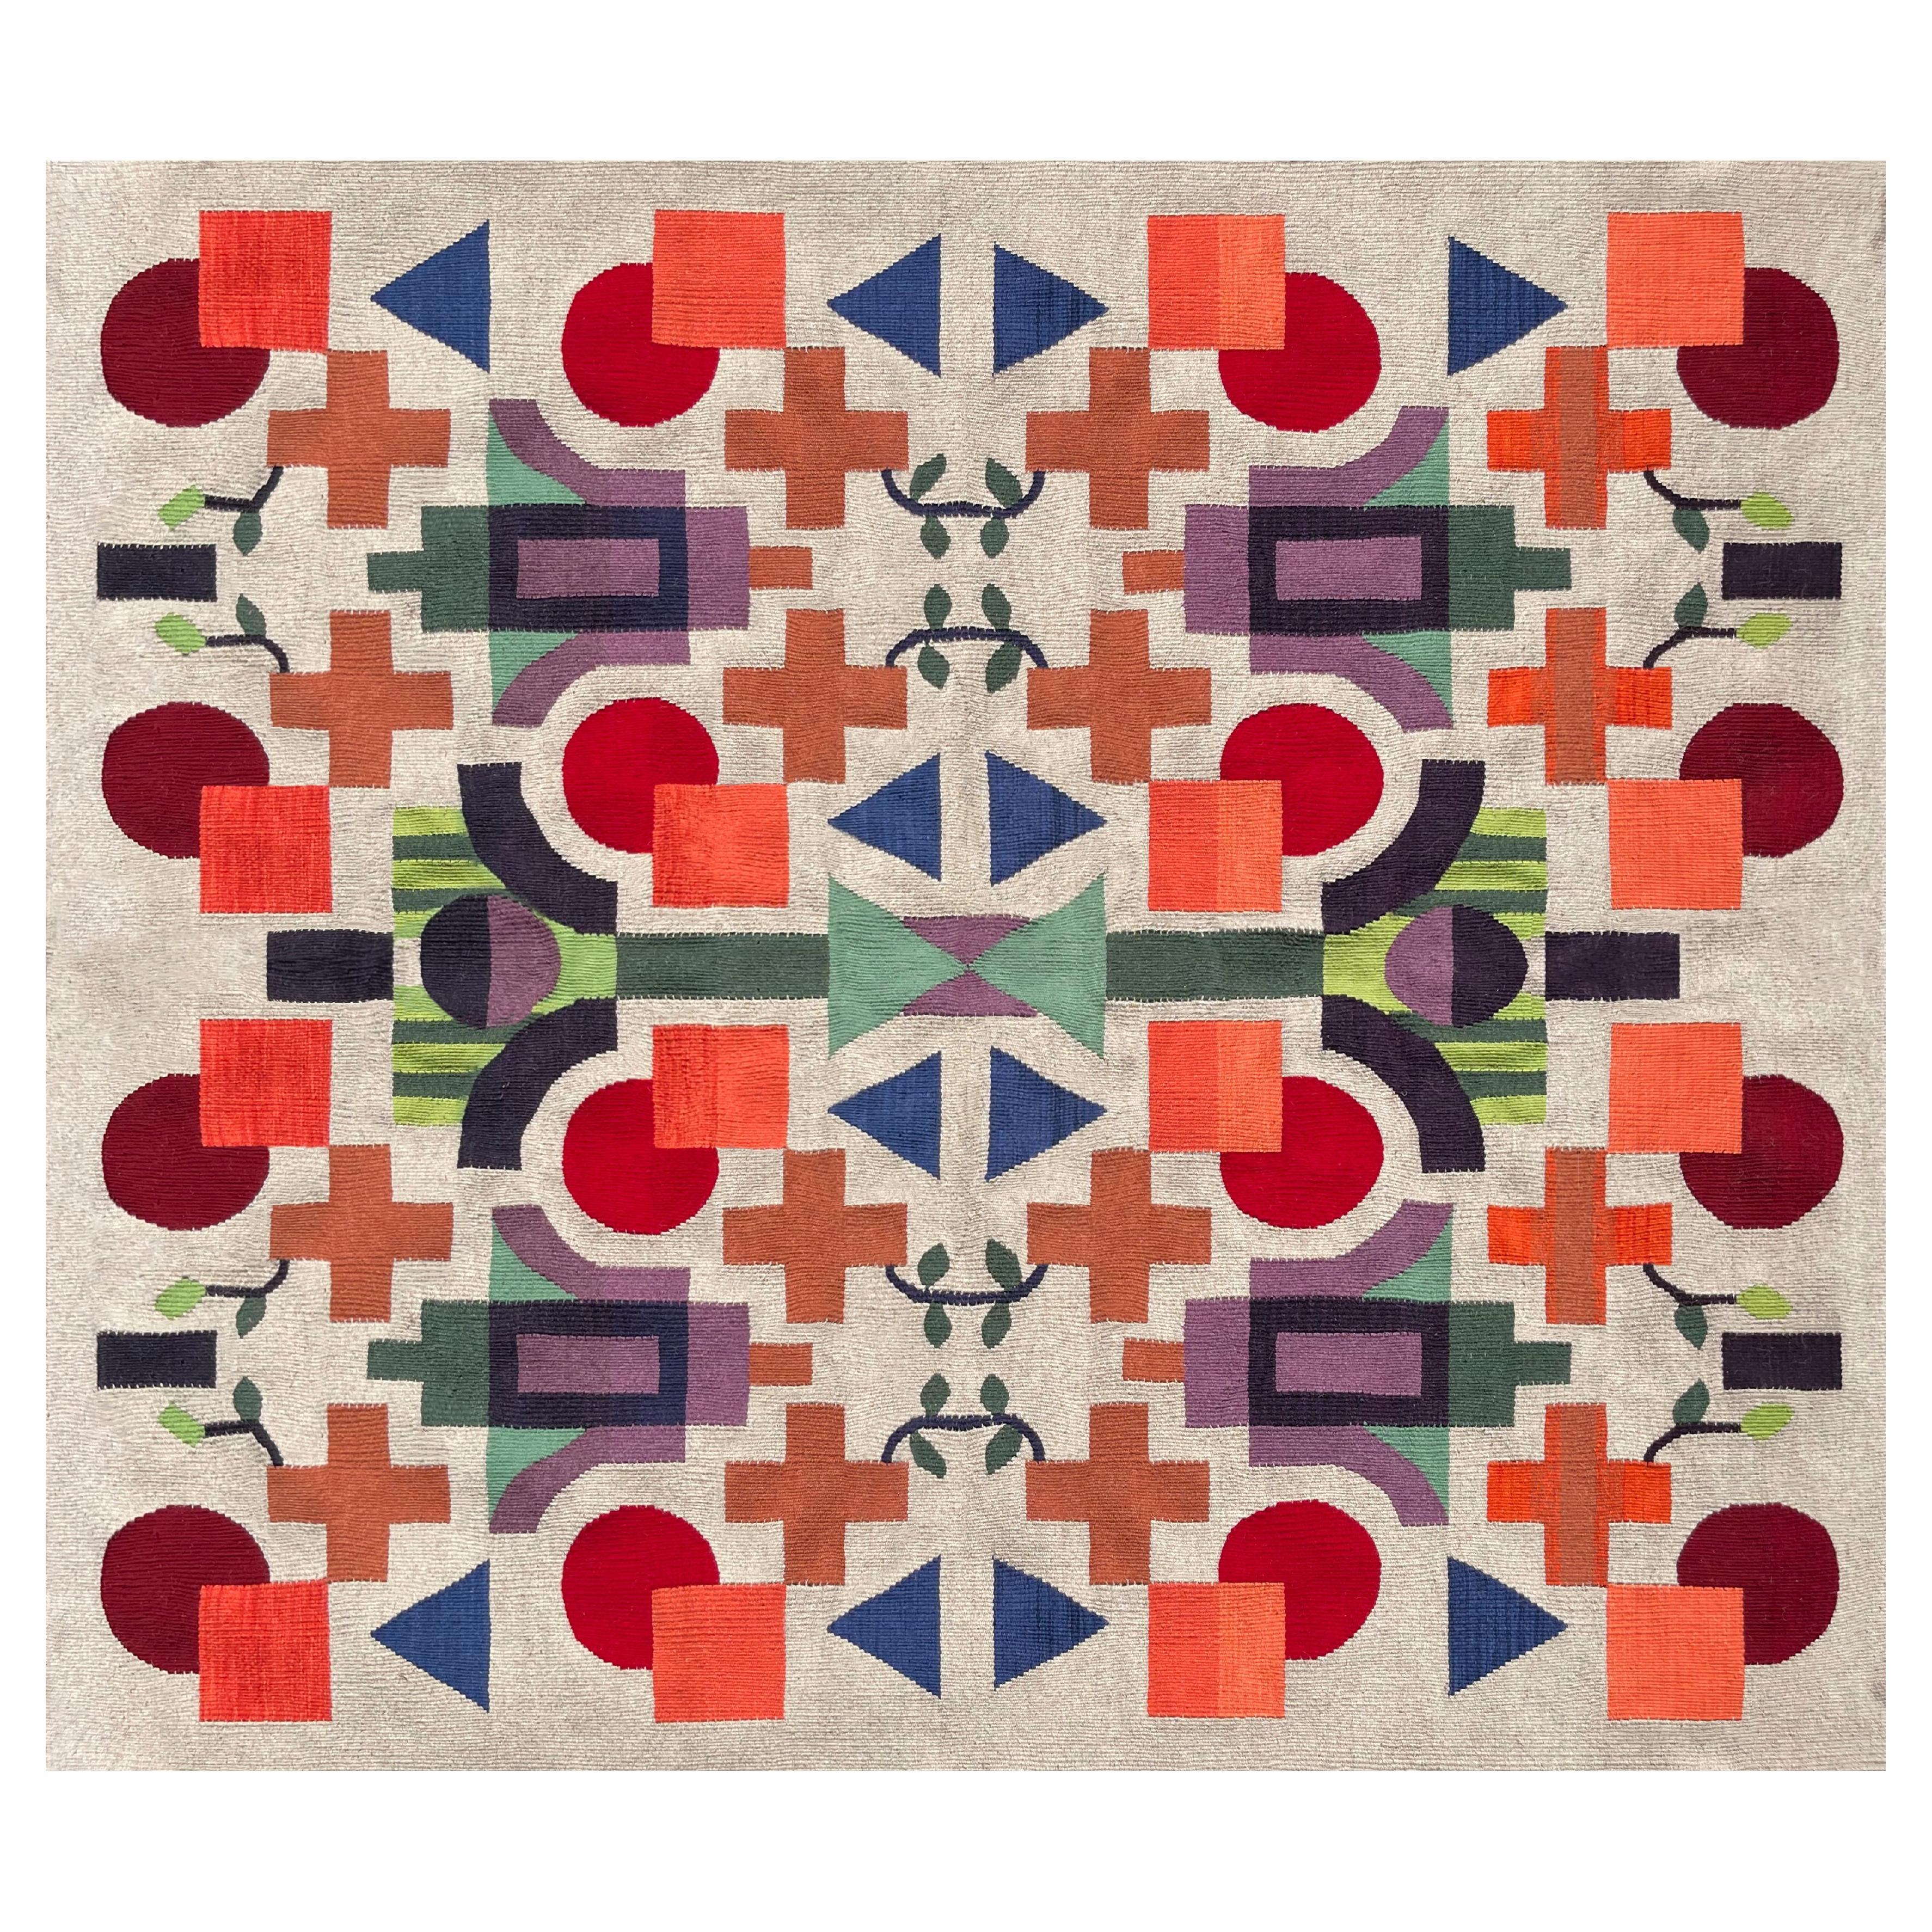 Suprematic Garden in Beige, Geometric Hand-Knotted Wool Rug by OLK Manufactory